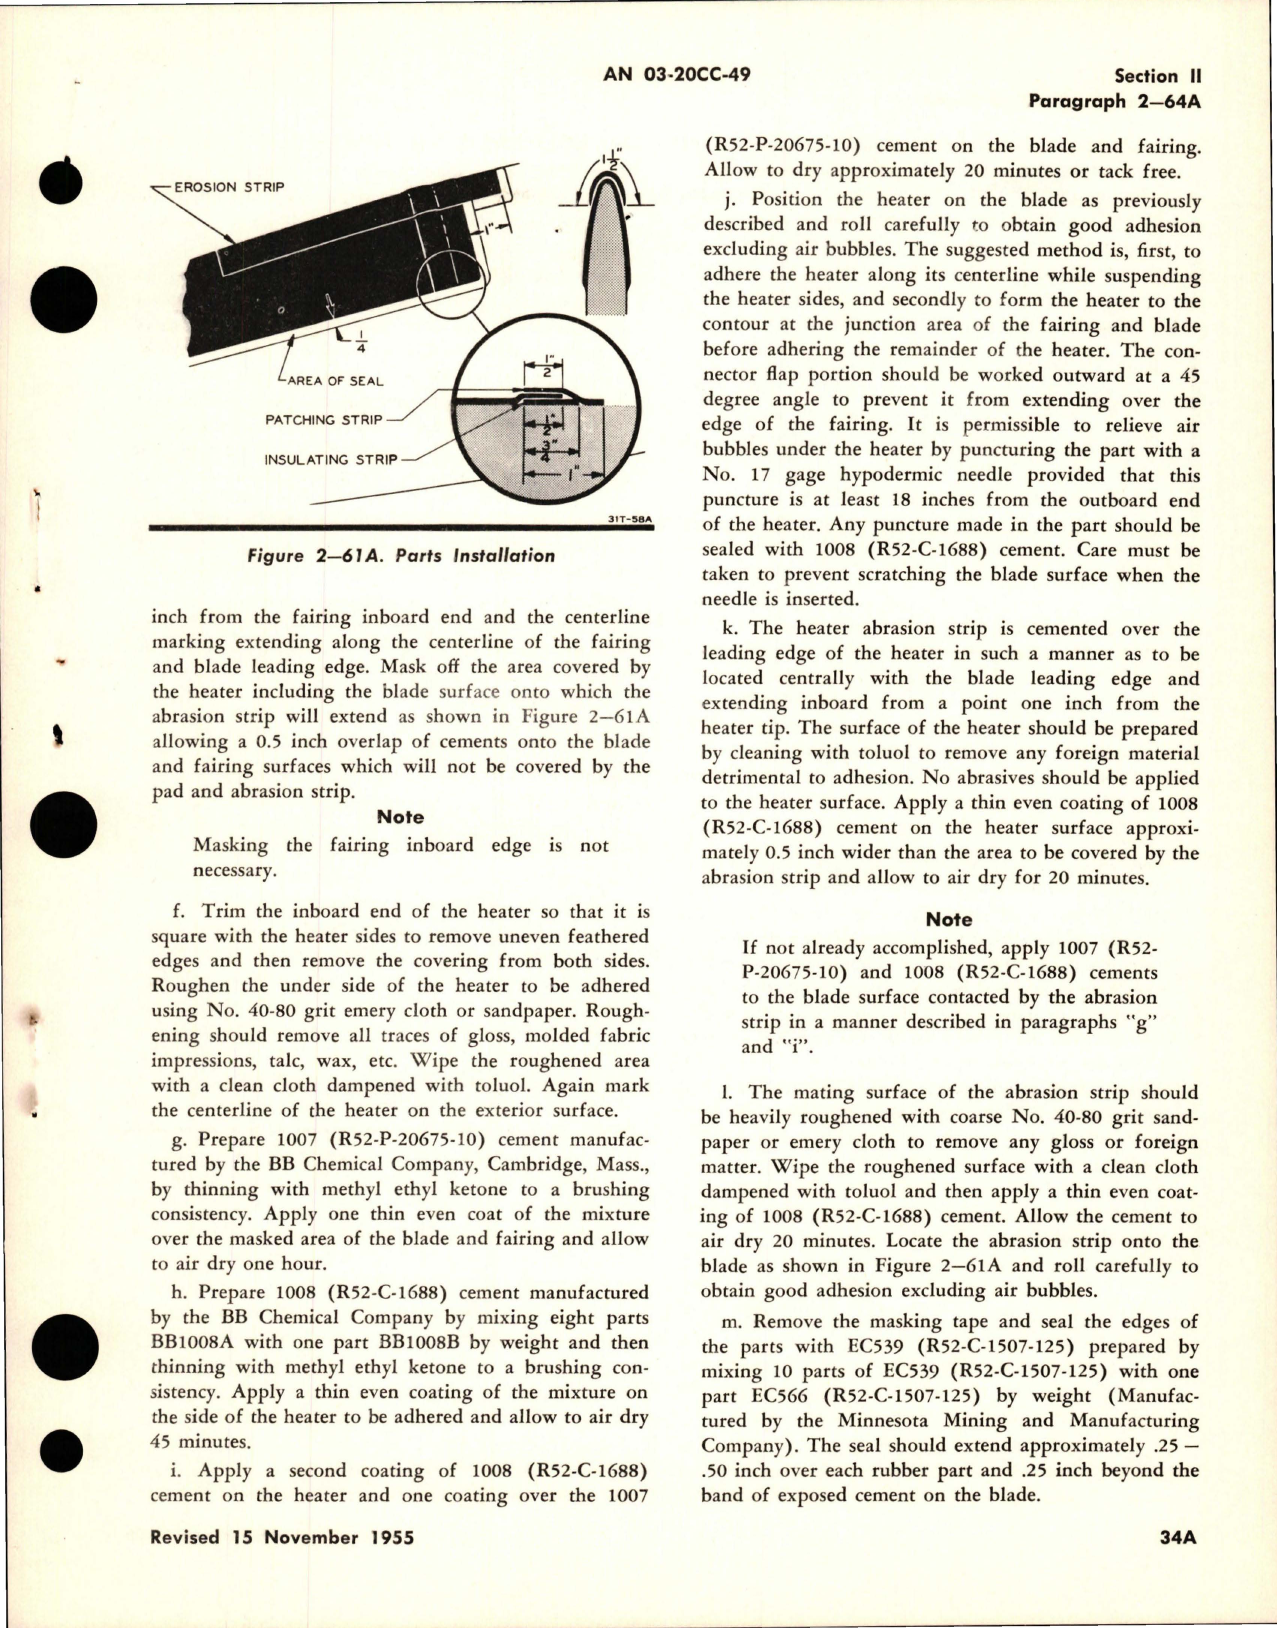 Sample page 7 from AirCorps Library document: Overhaul Instructions for Hydromatic Propellers and Bracket Assemblies